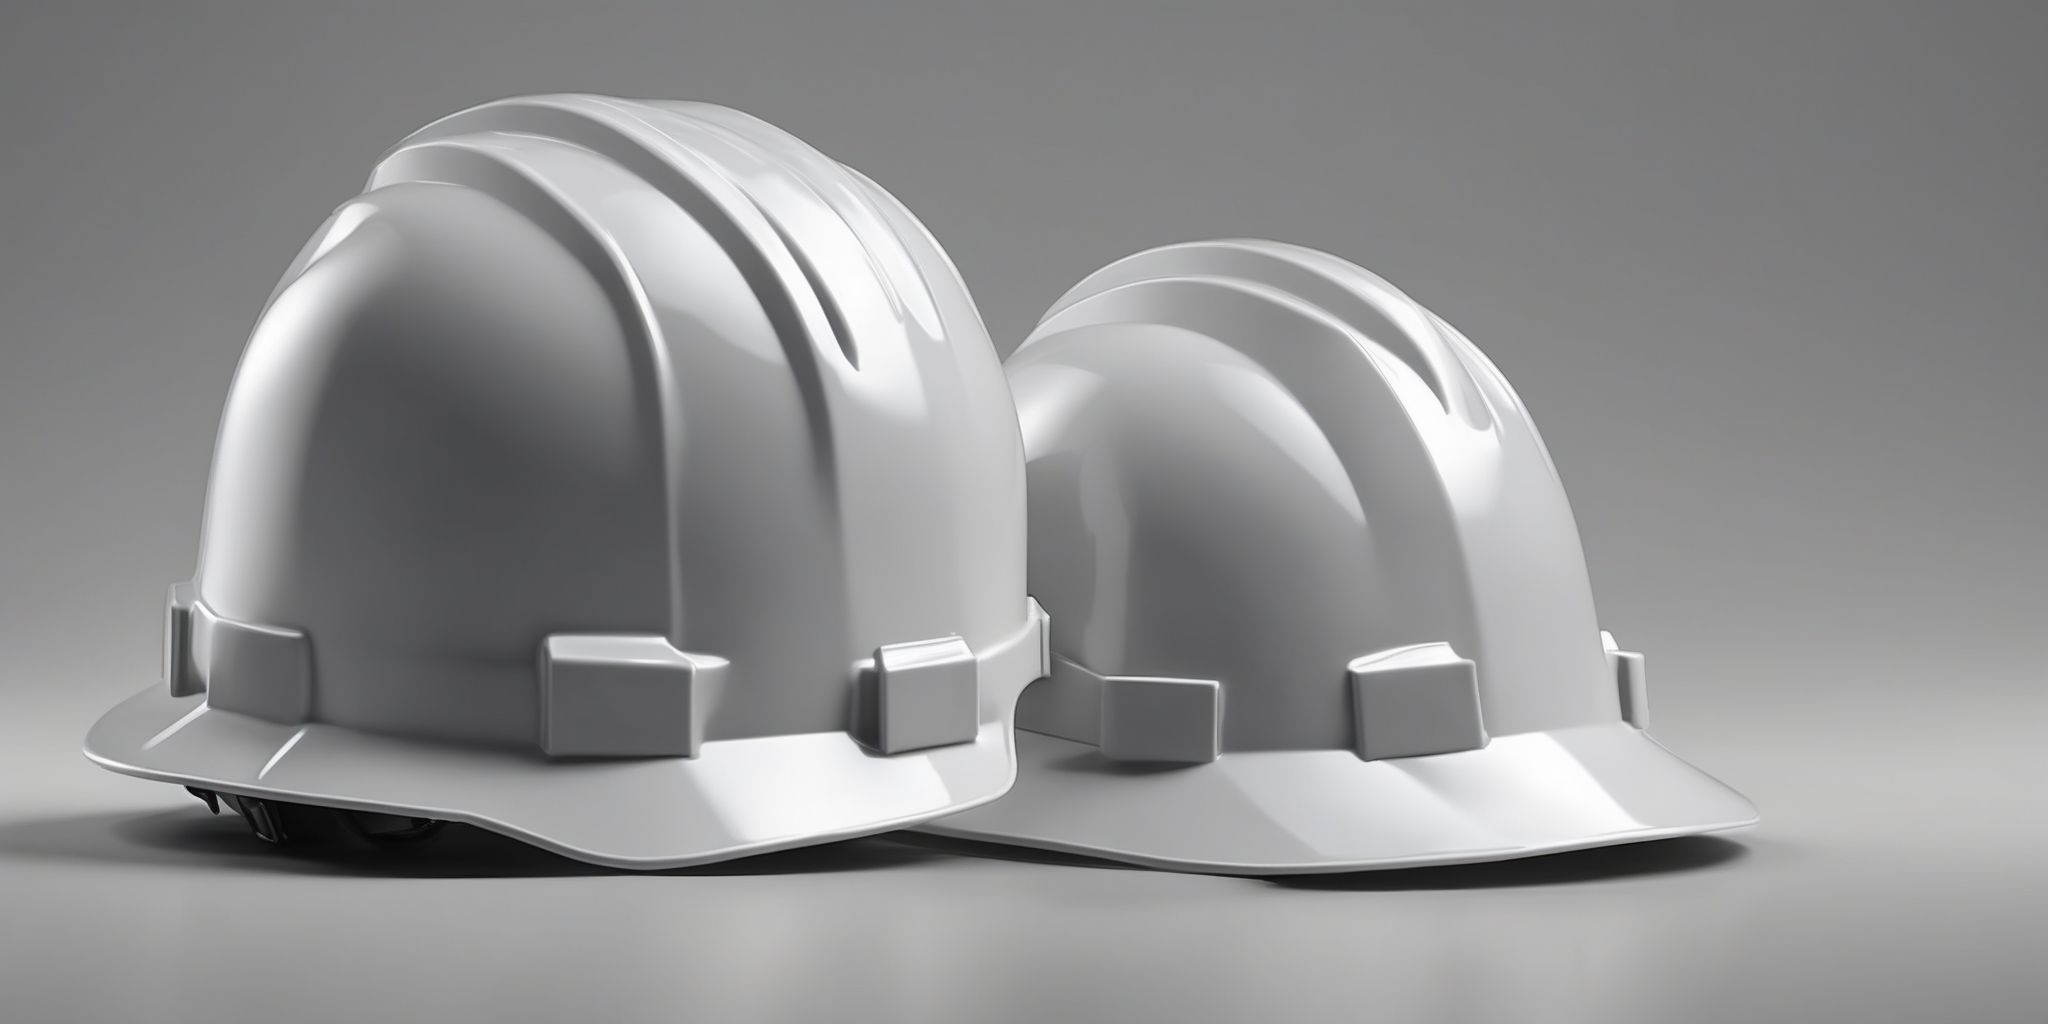 Hard hat  in realistic, photographic style